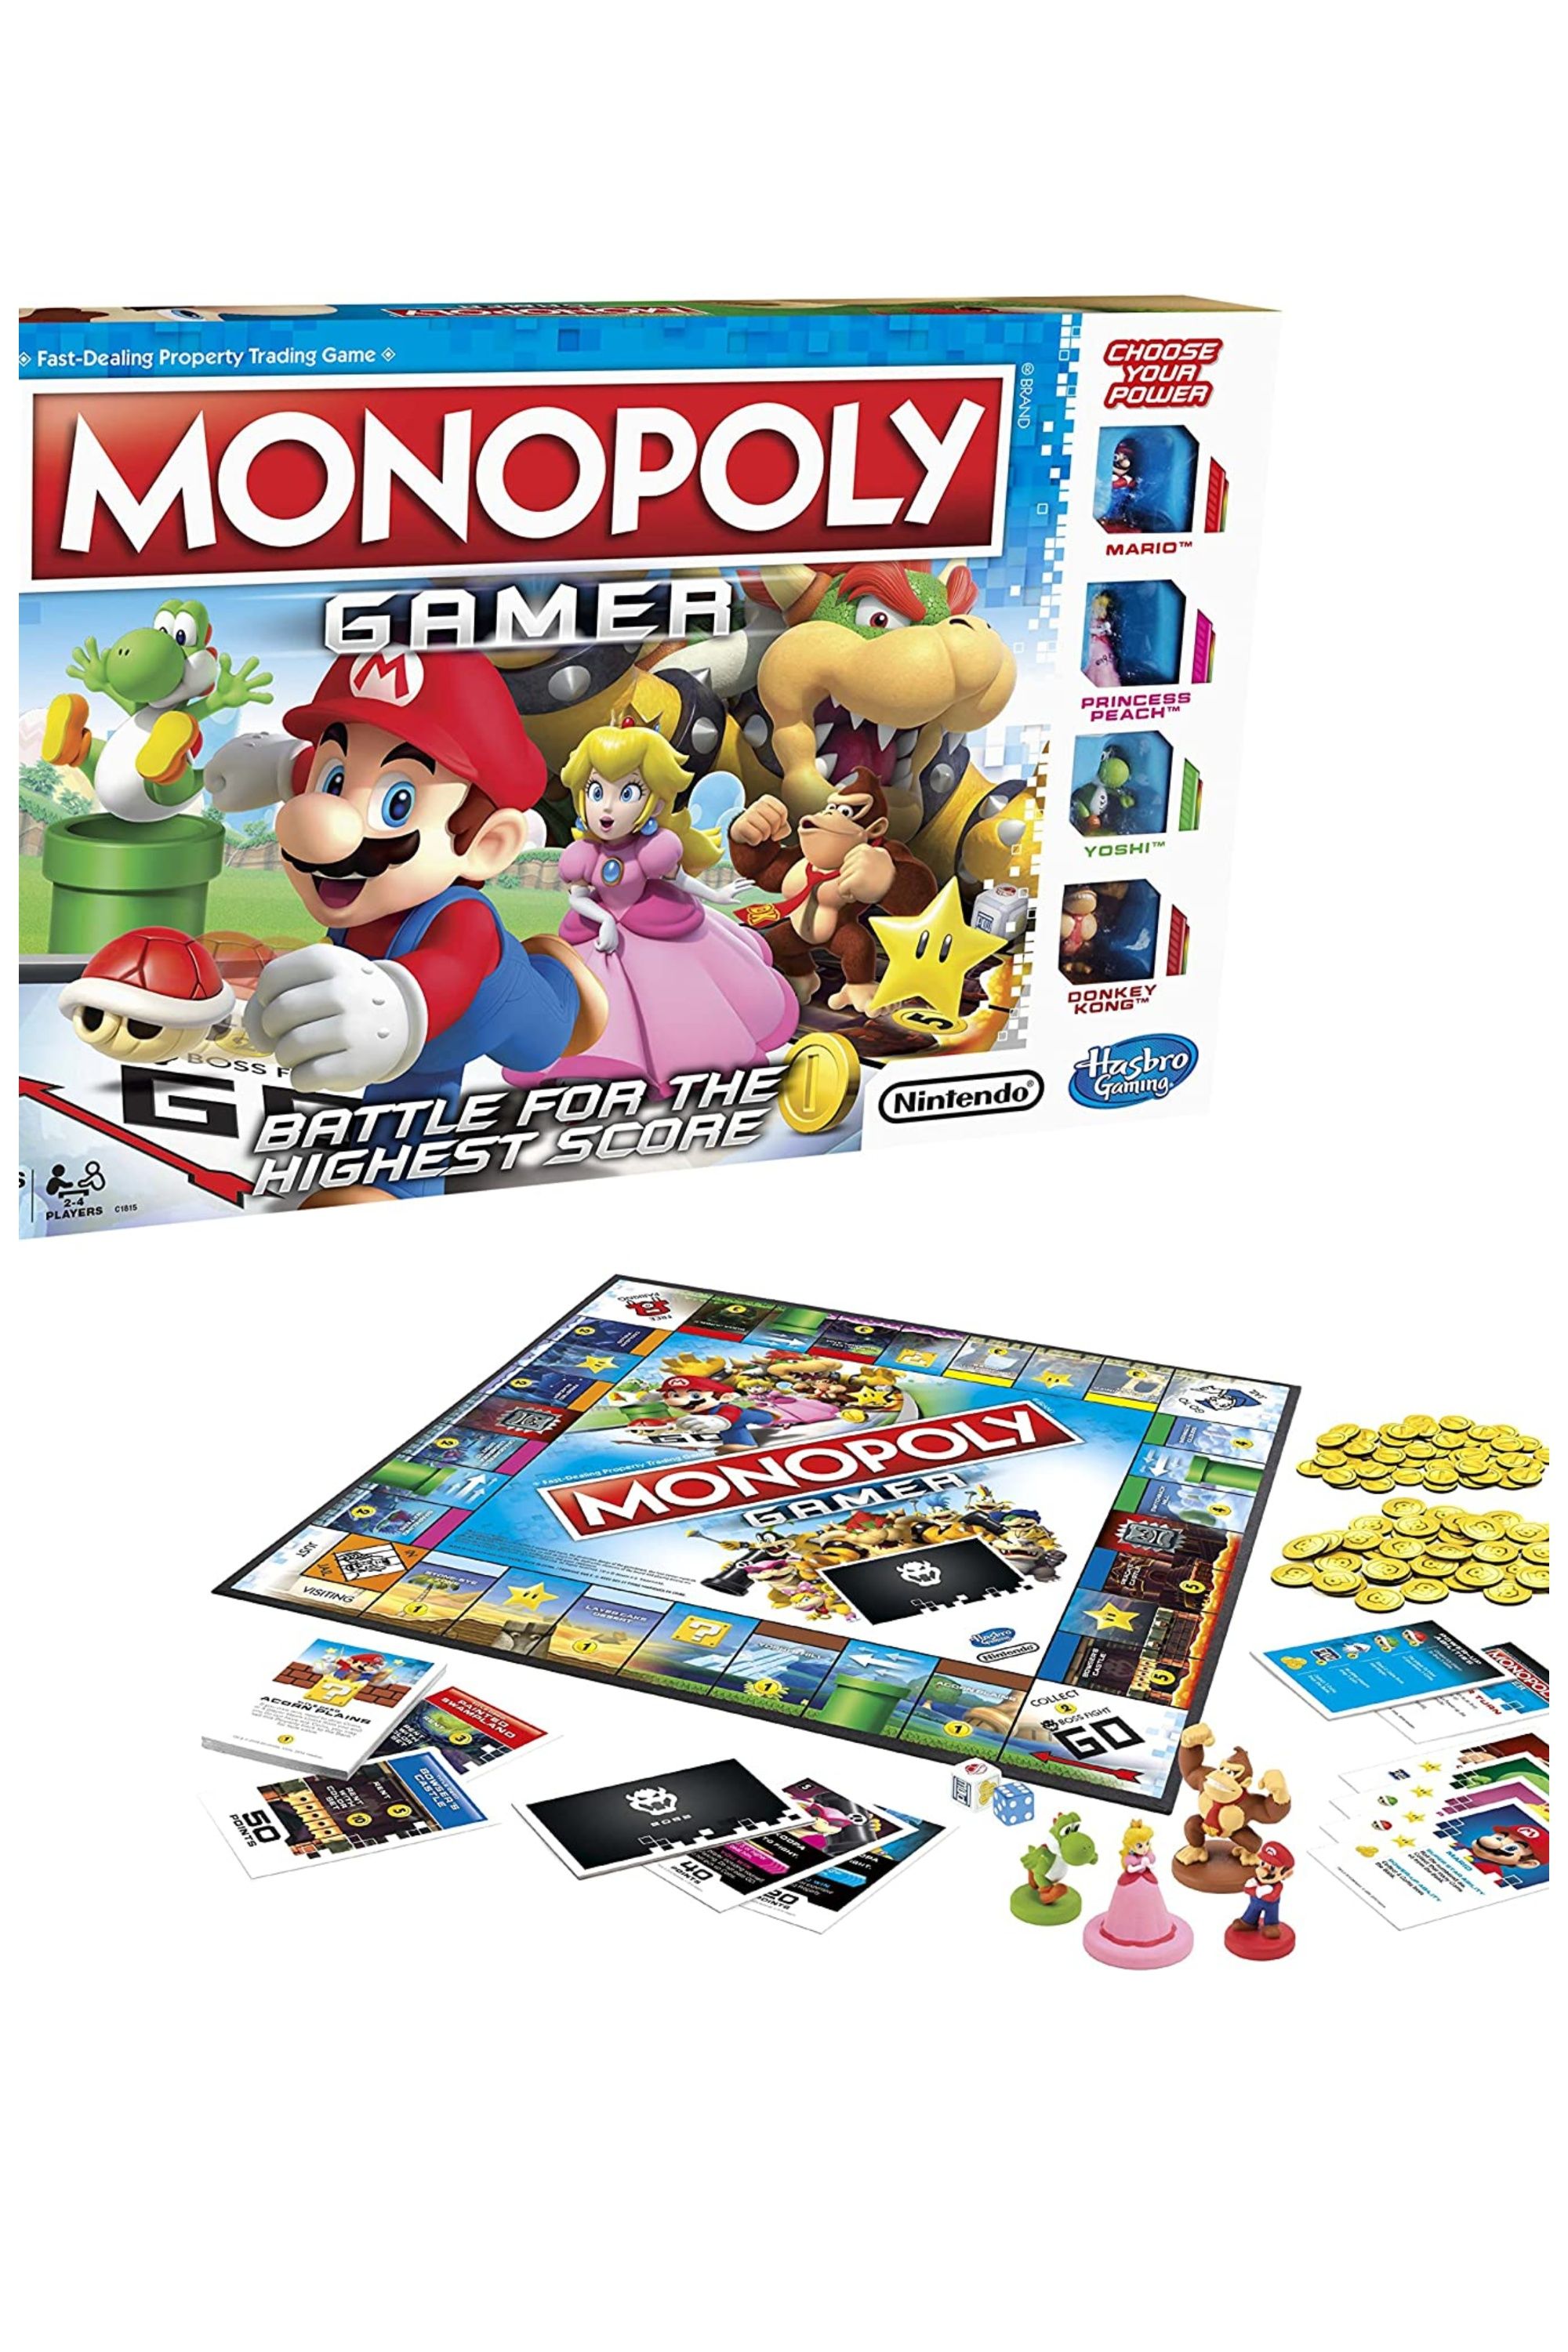 Monopoly Gamer edition